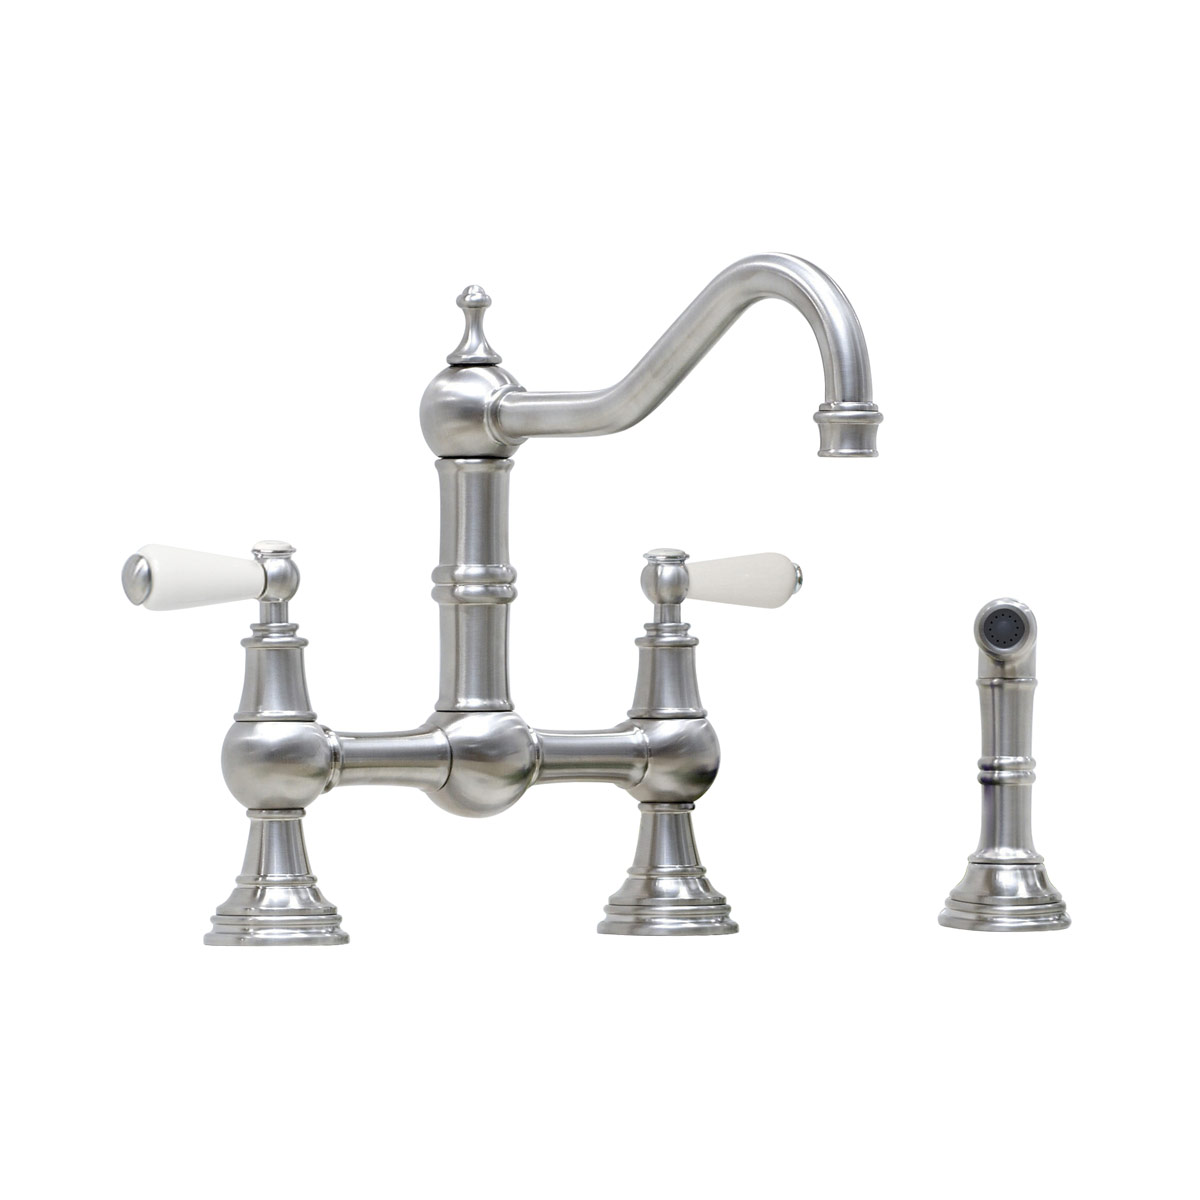 Shaws by Perrin & Rowe Hambleton French bridge mixer with spray rinse in Pewter. Provence style kitchen tap AUSH.4756. Distributed in Australia by Luxe by Design, Brisbane.